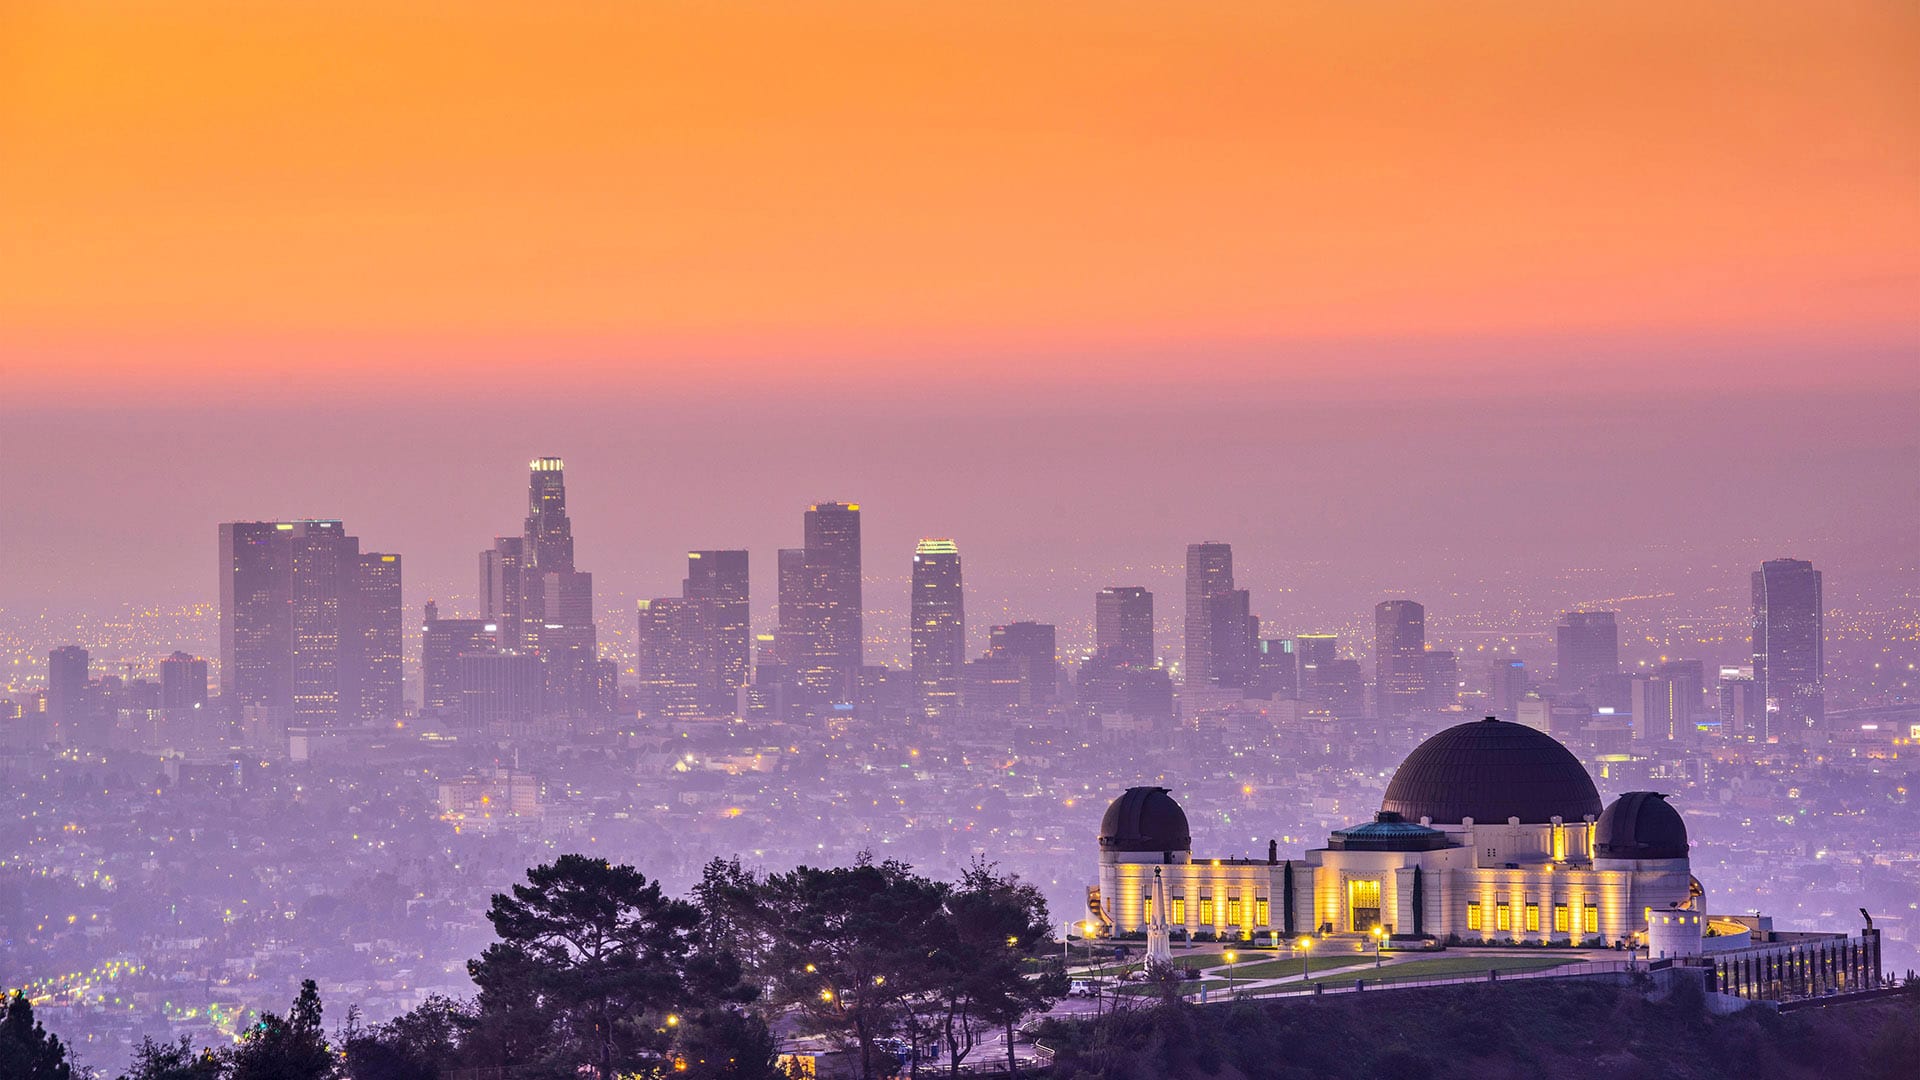 The Los Angeles skyline from Griffith Park at sunset